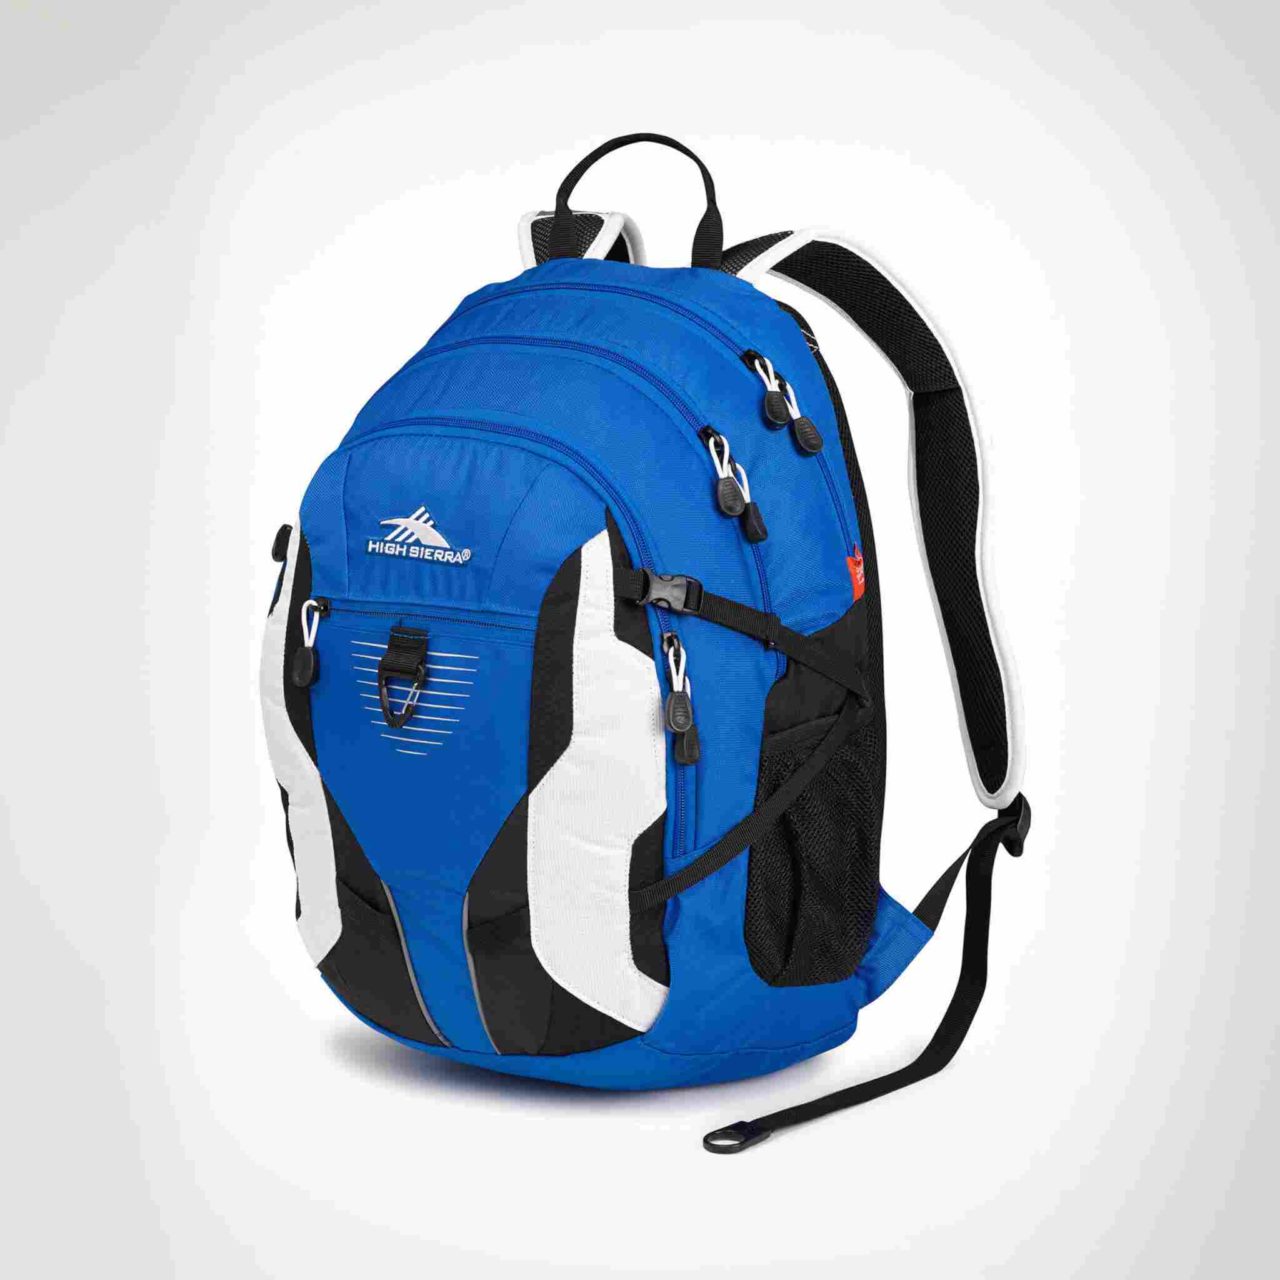 product-backpack-tough-1280x1280.jpg